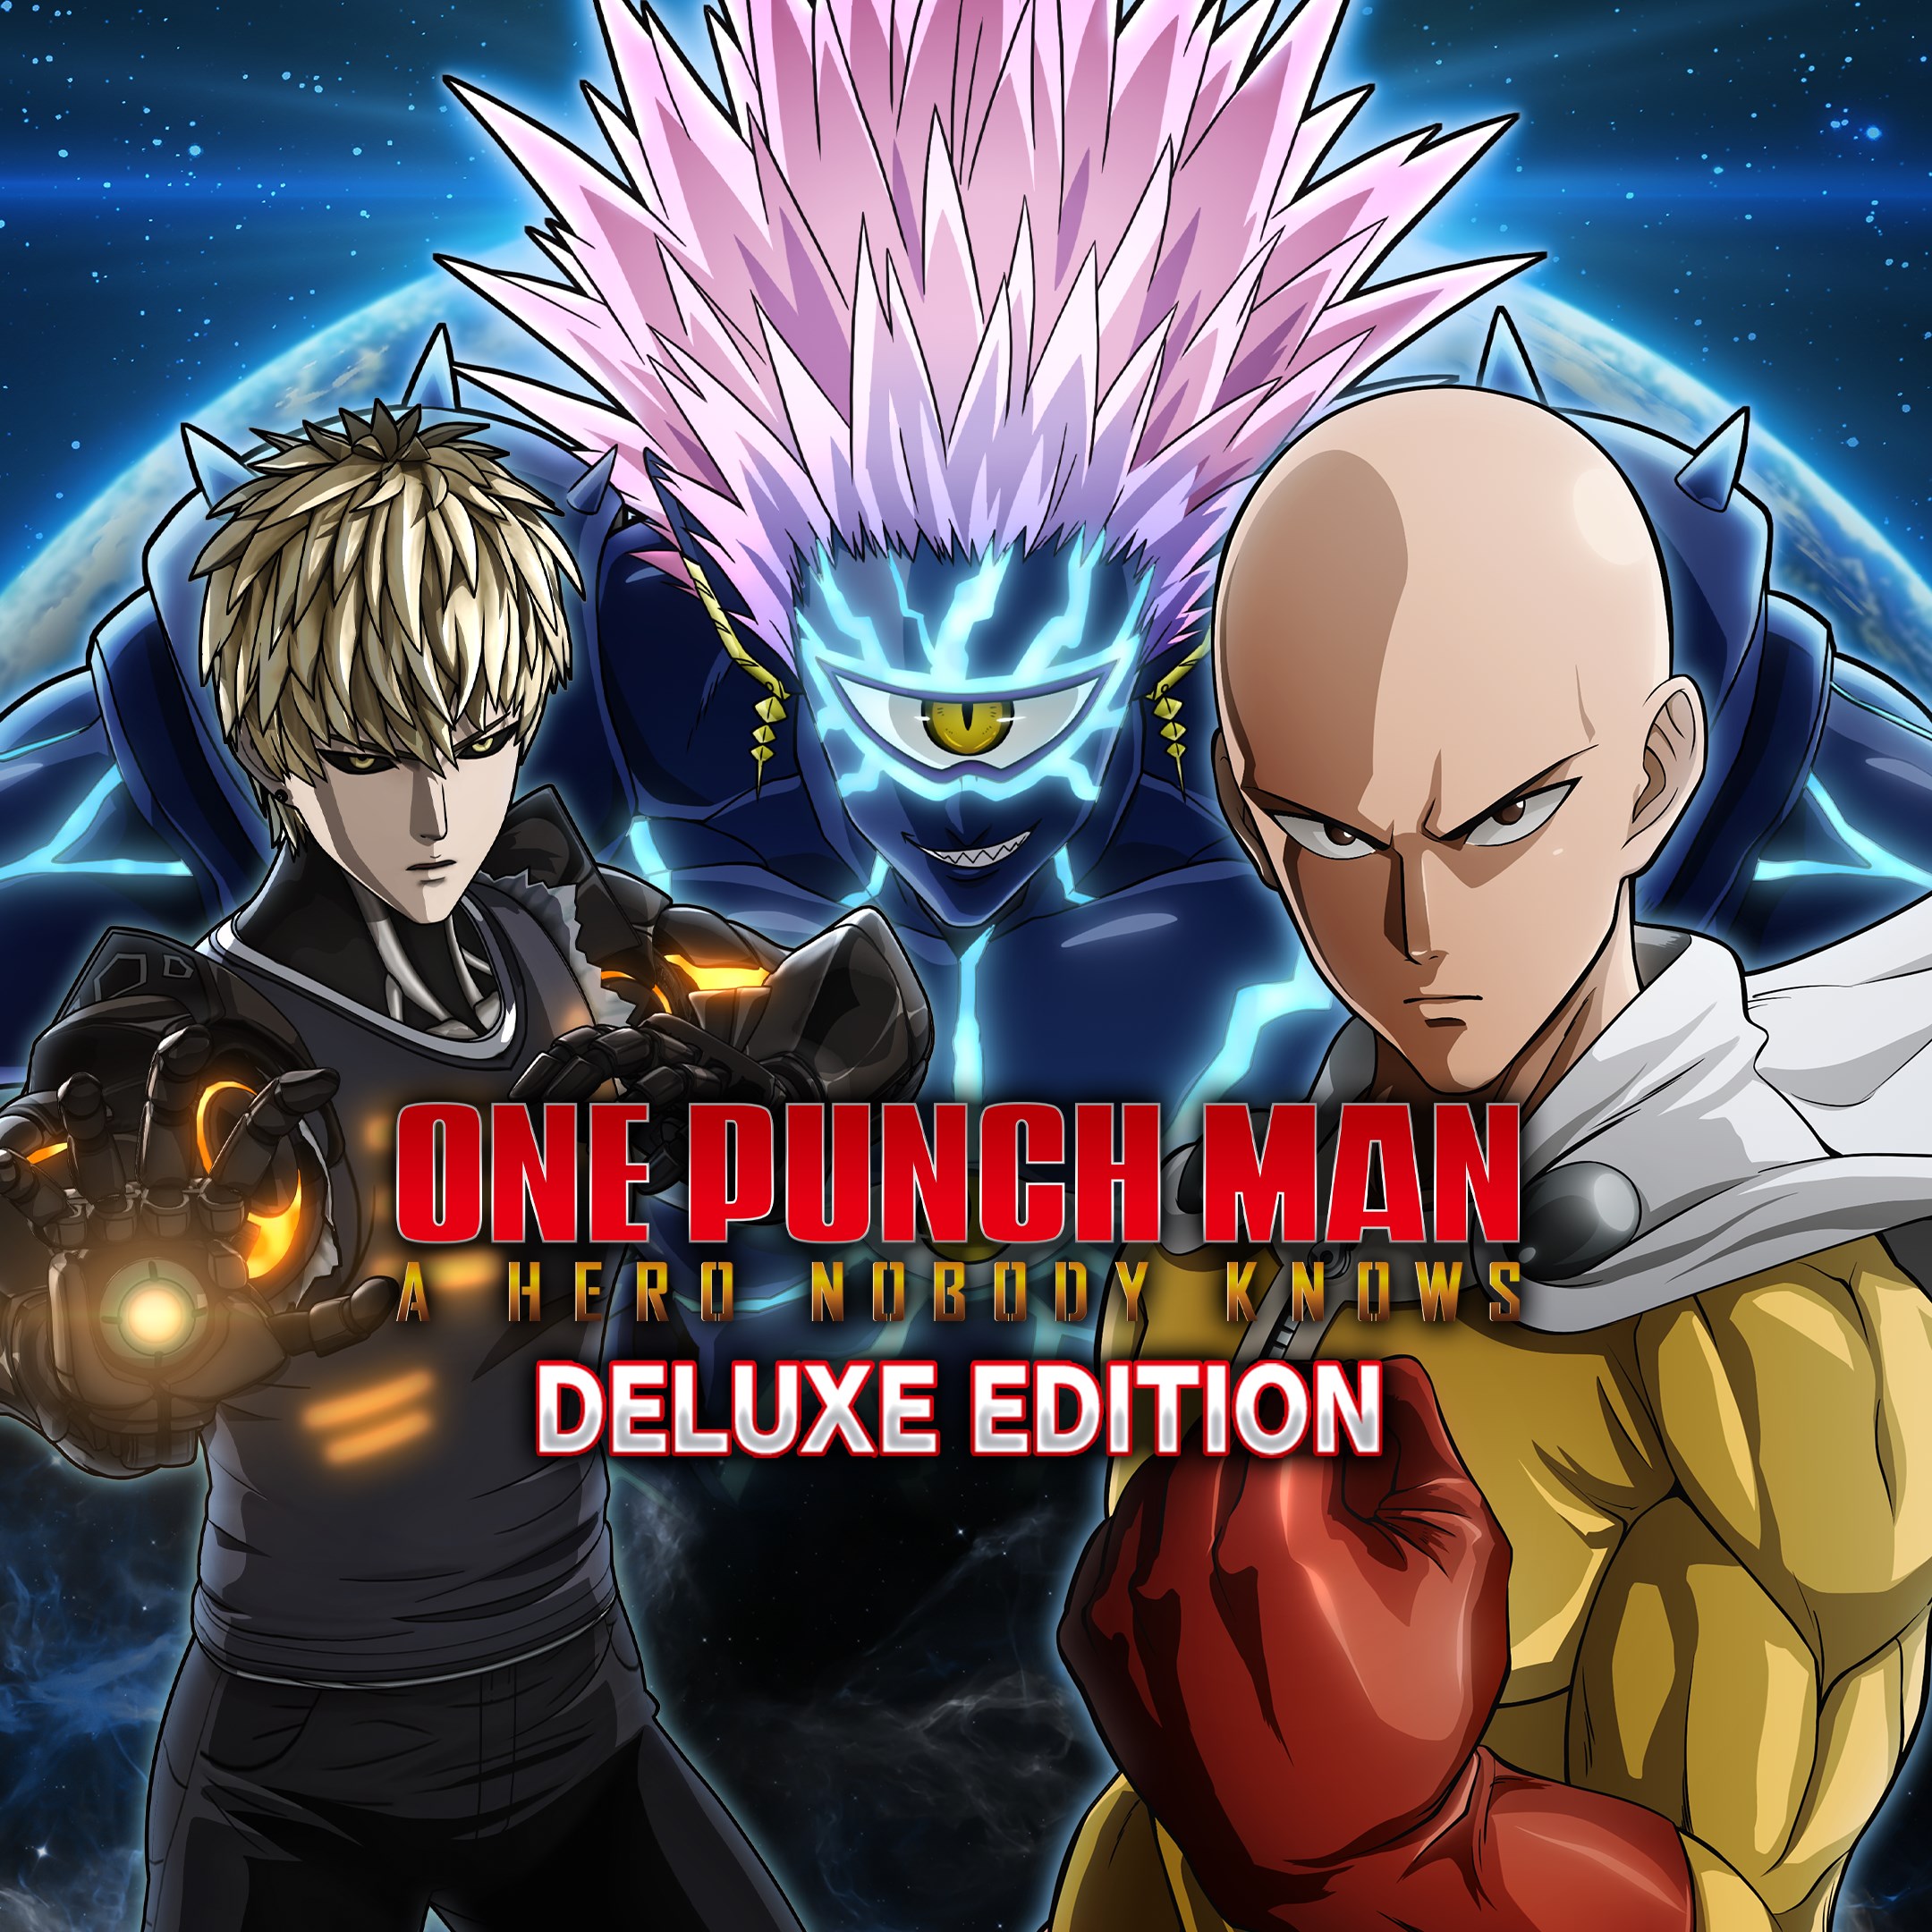 ONE PUNCH MAN: A HERO NOBODY KNOWS Edição Deluxe - Reserva